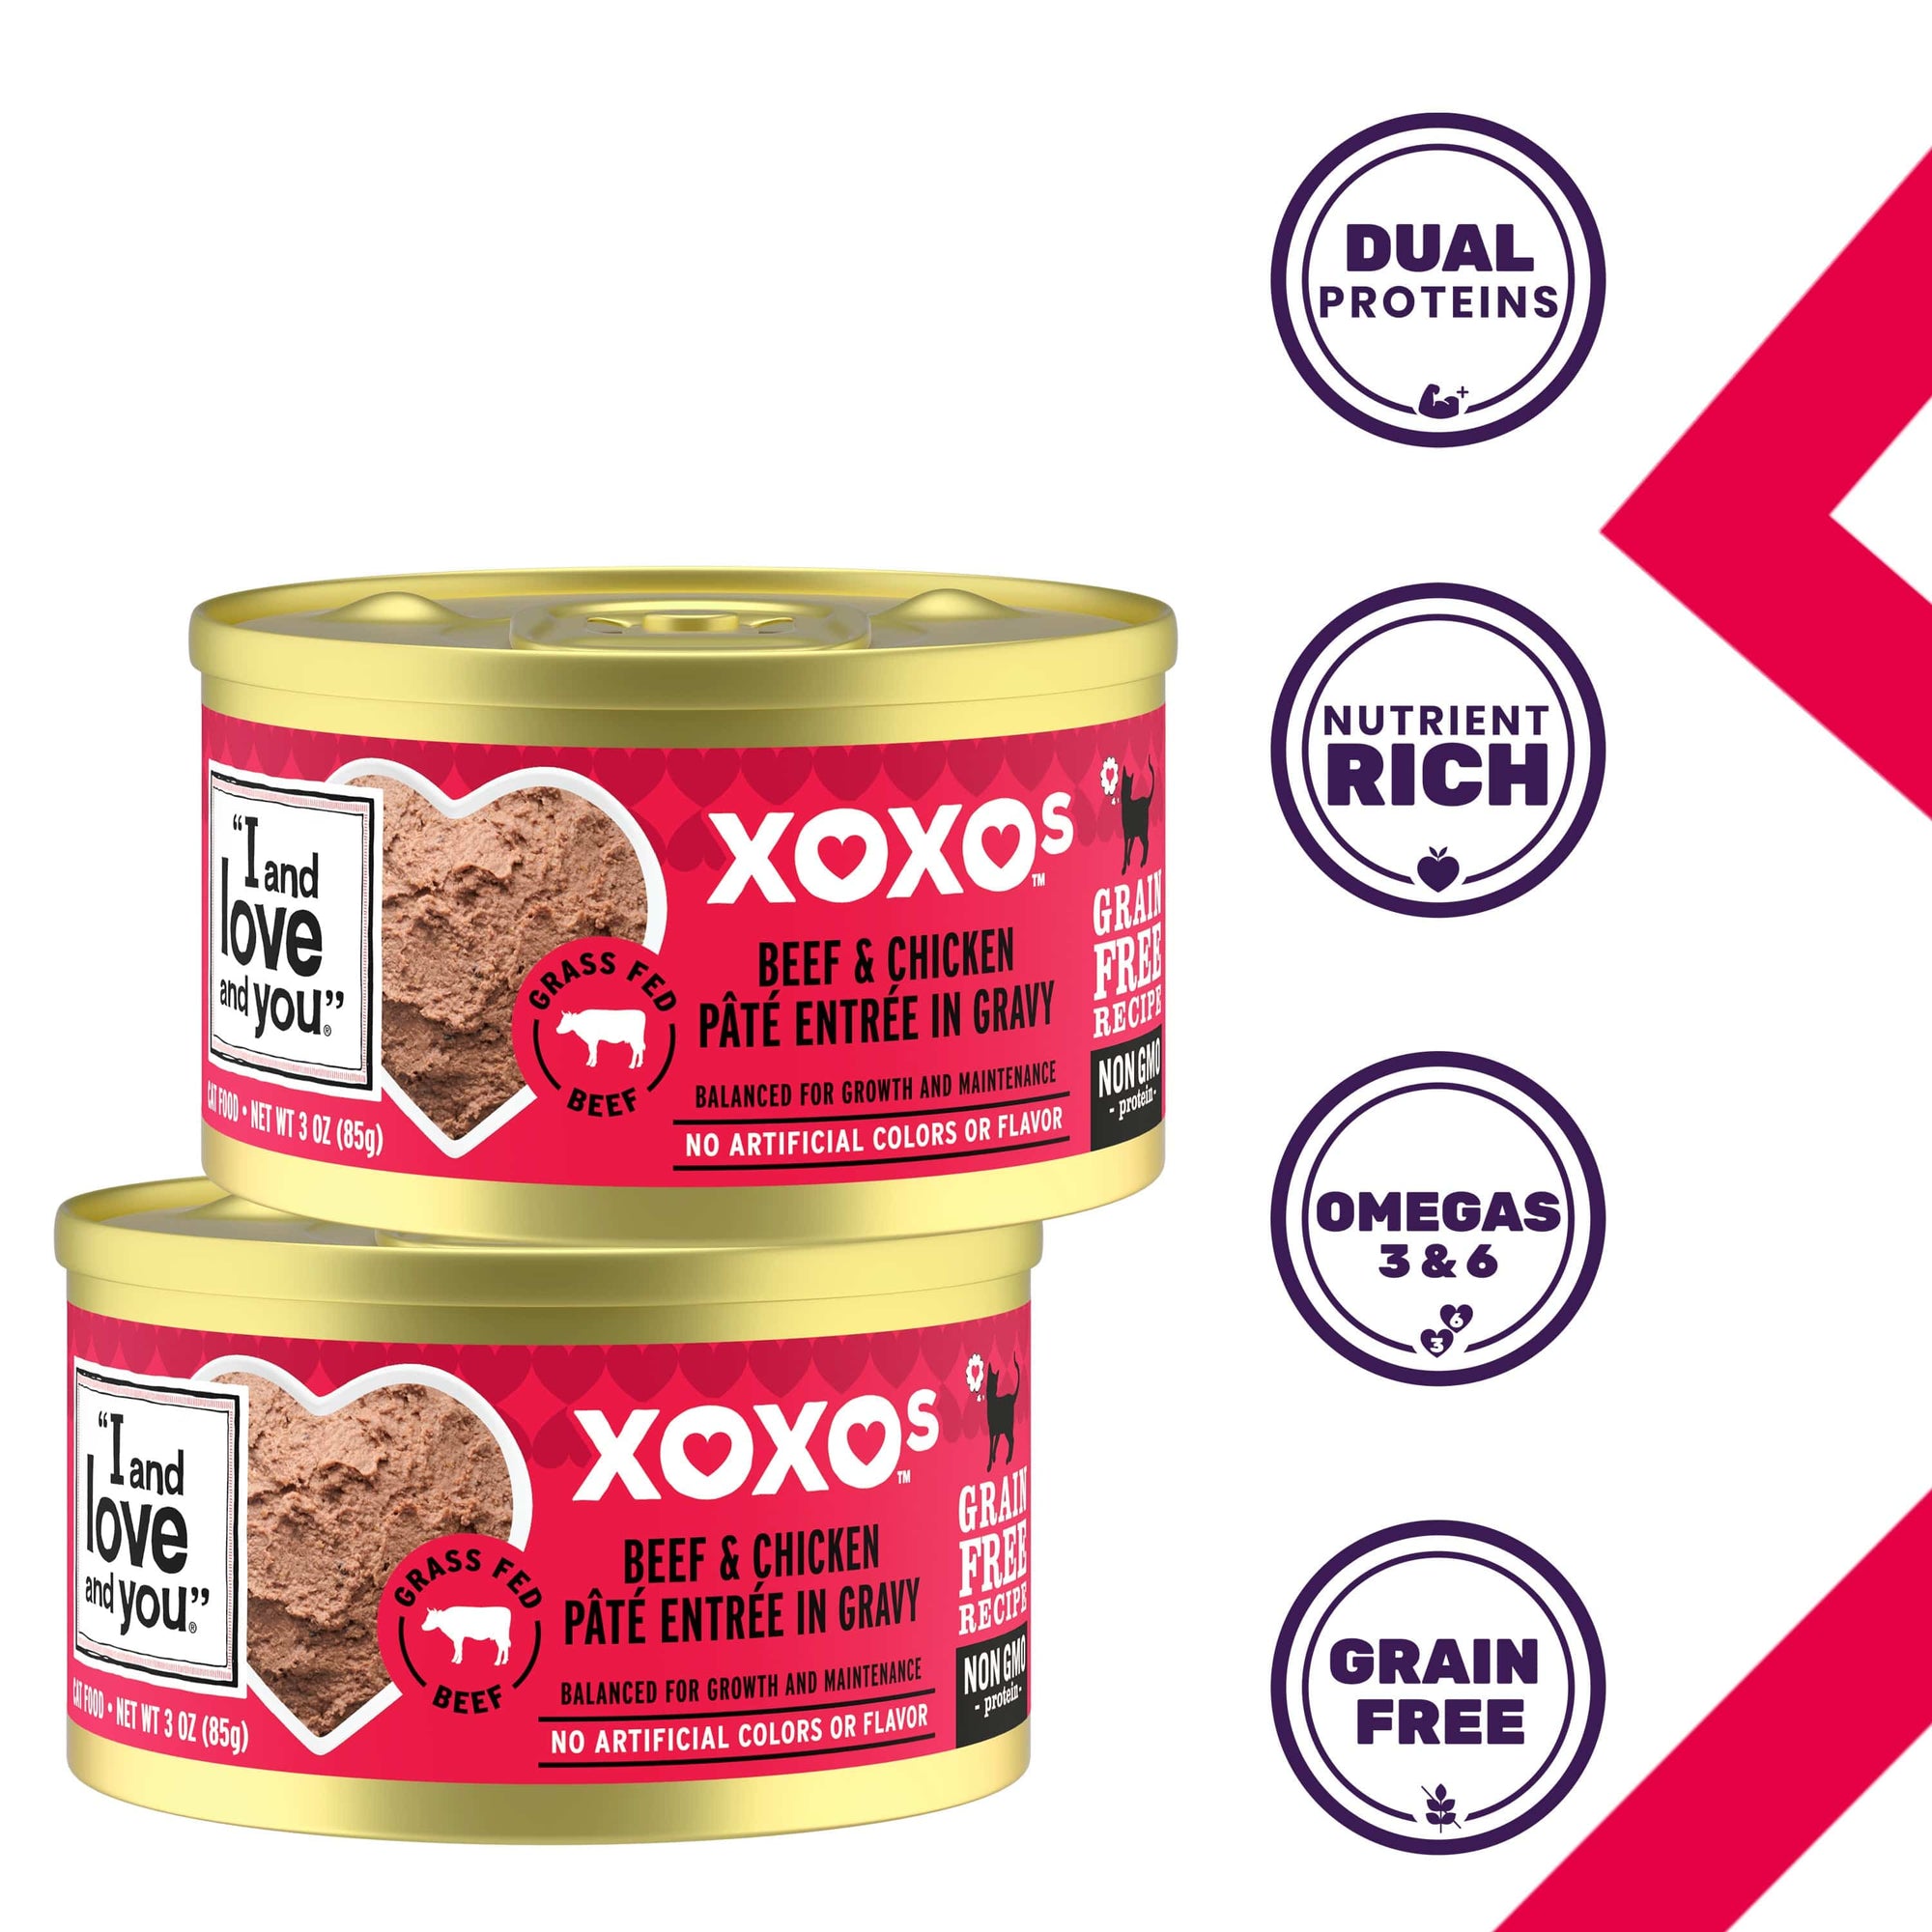 XOXOs Beef & Chicken Pate cans, close-up of savory gourmet meal options for cats.